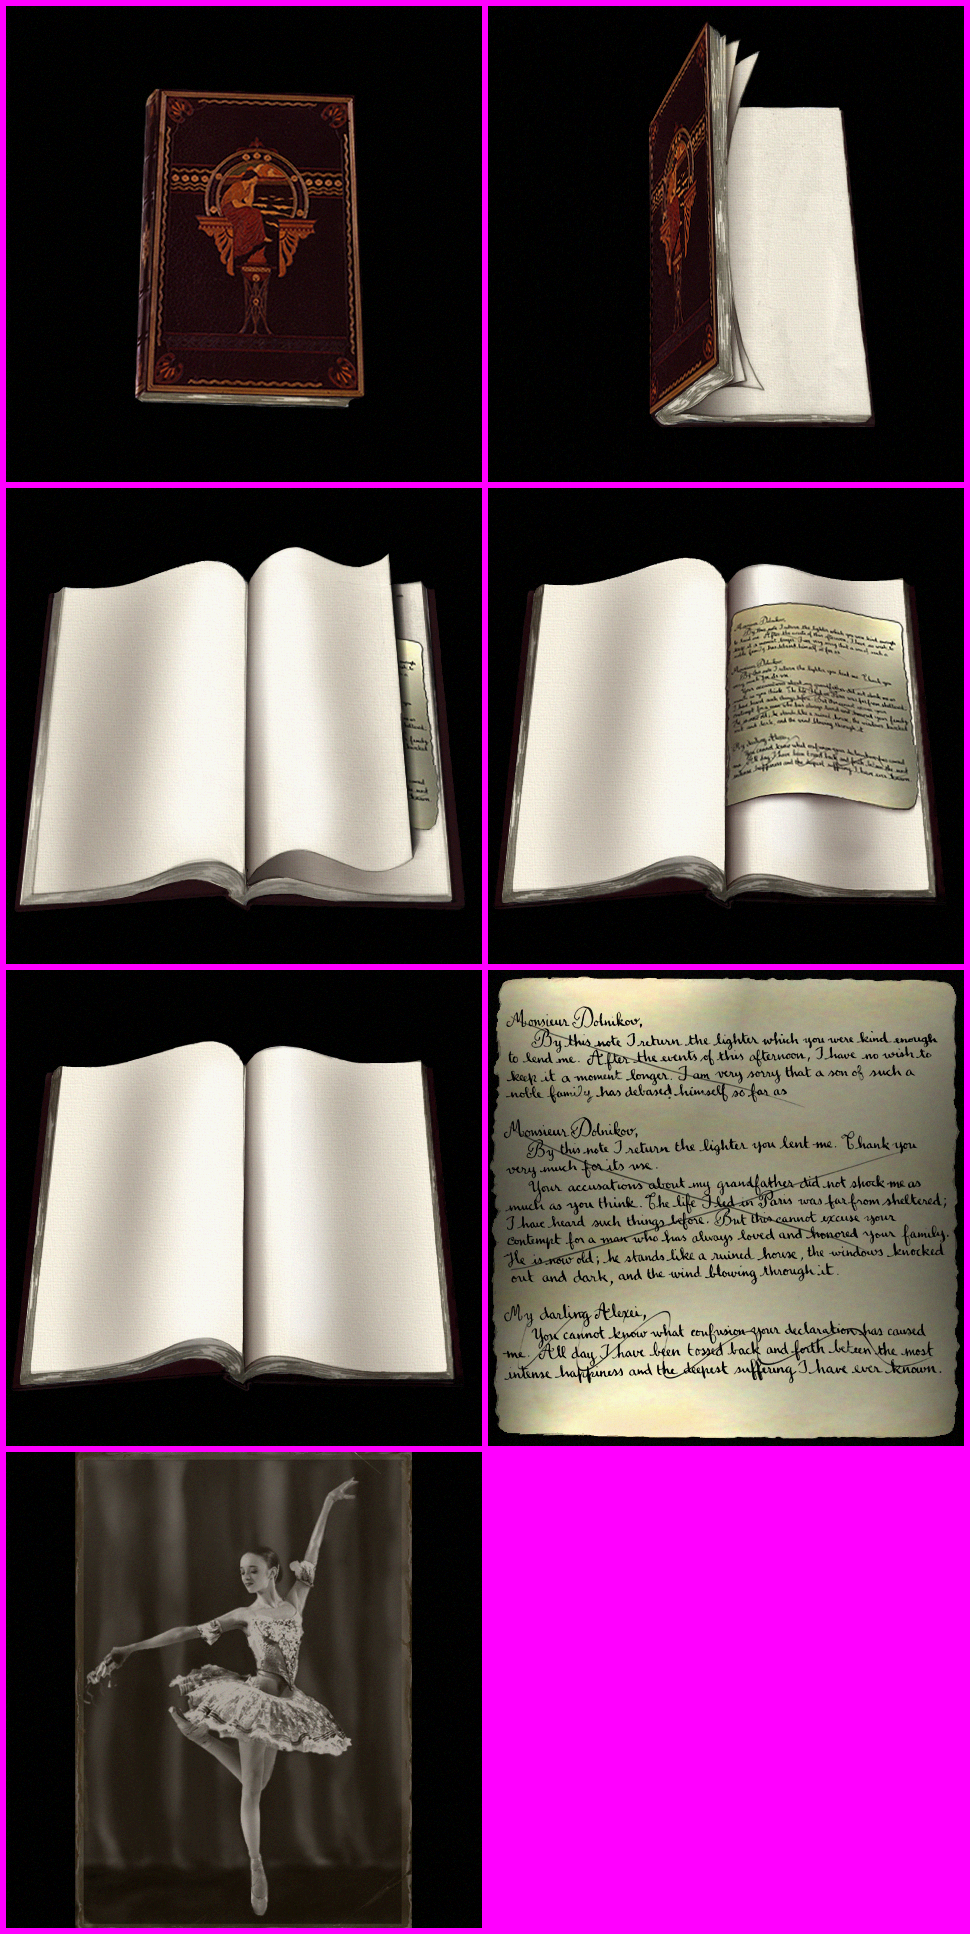 The Last Express - Tatiana's Book and Letter